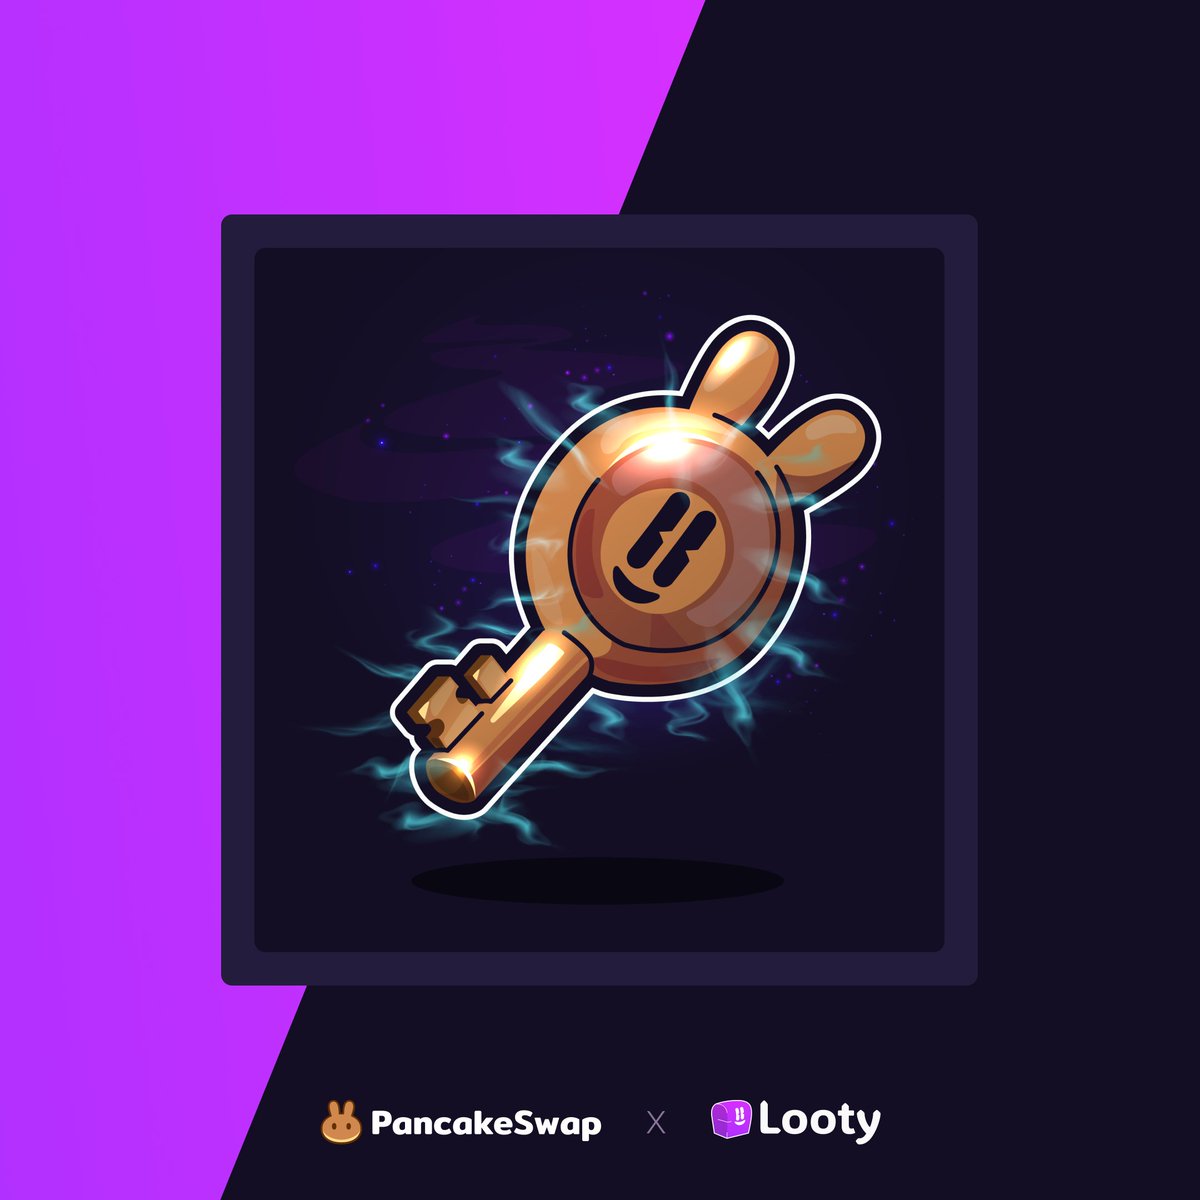 Keys have been airdropped to @PancakeSwap's INSPire Fiesta winners!

Take a look at your BNB wallets, surprises await! 🤩

CA:
0x340A5ff8c0a249eaf0790e6a90503EEF7883e60c

Stay tuned for the Lootbox opening date. Notifs on! 🔔